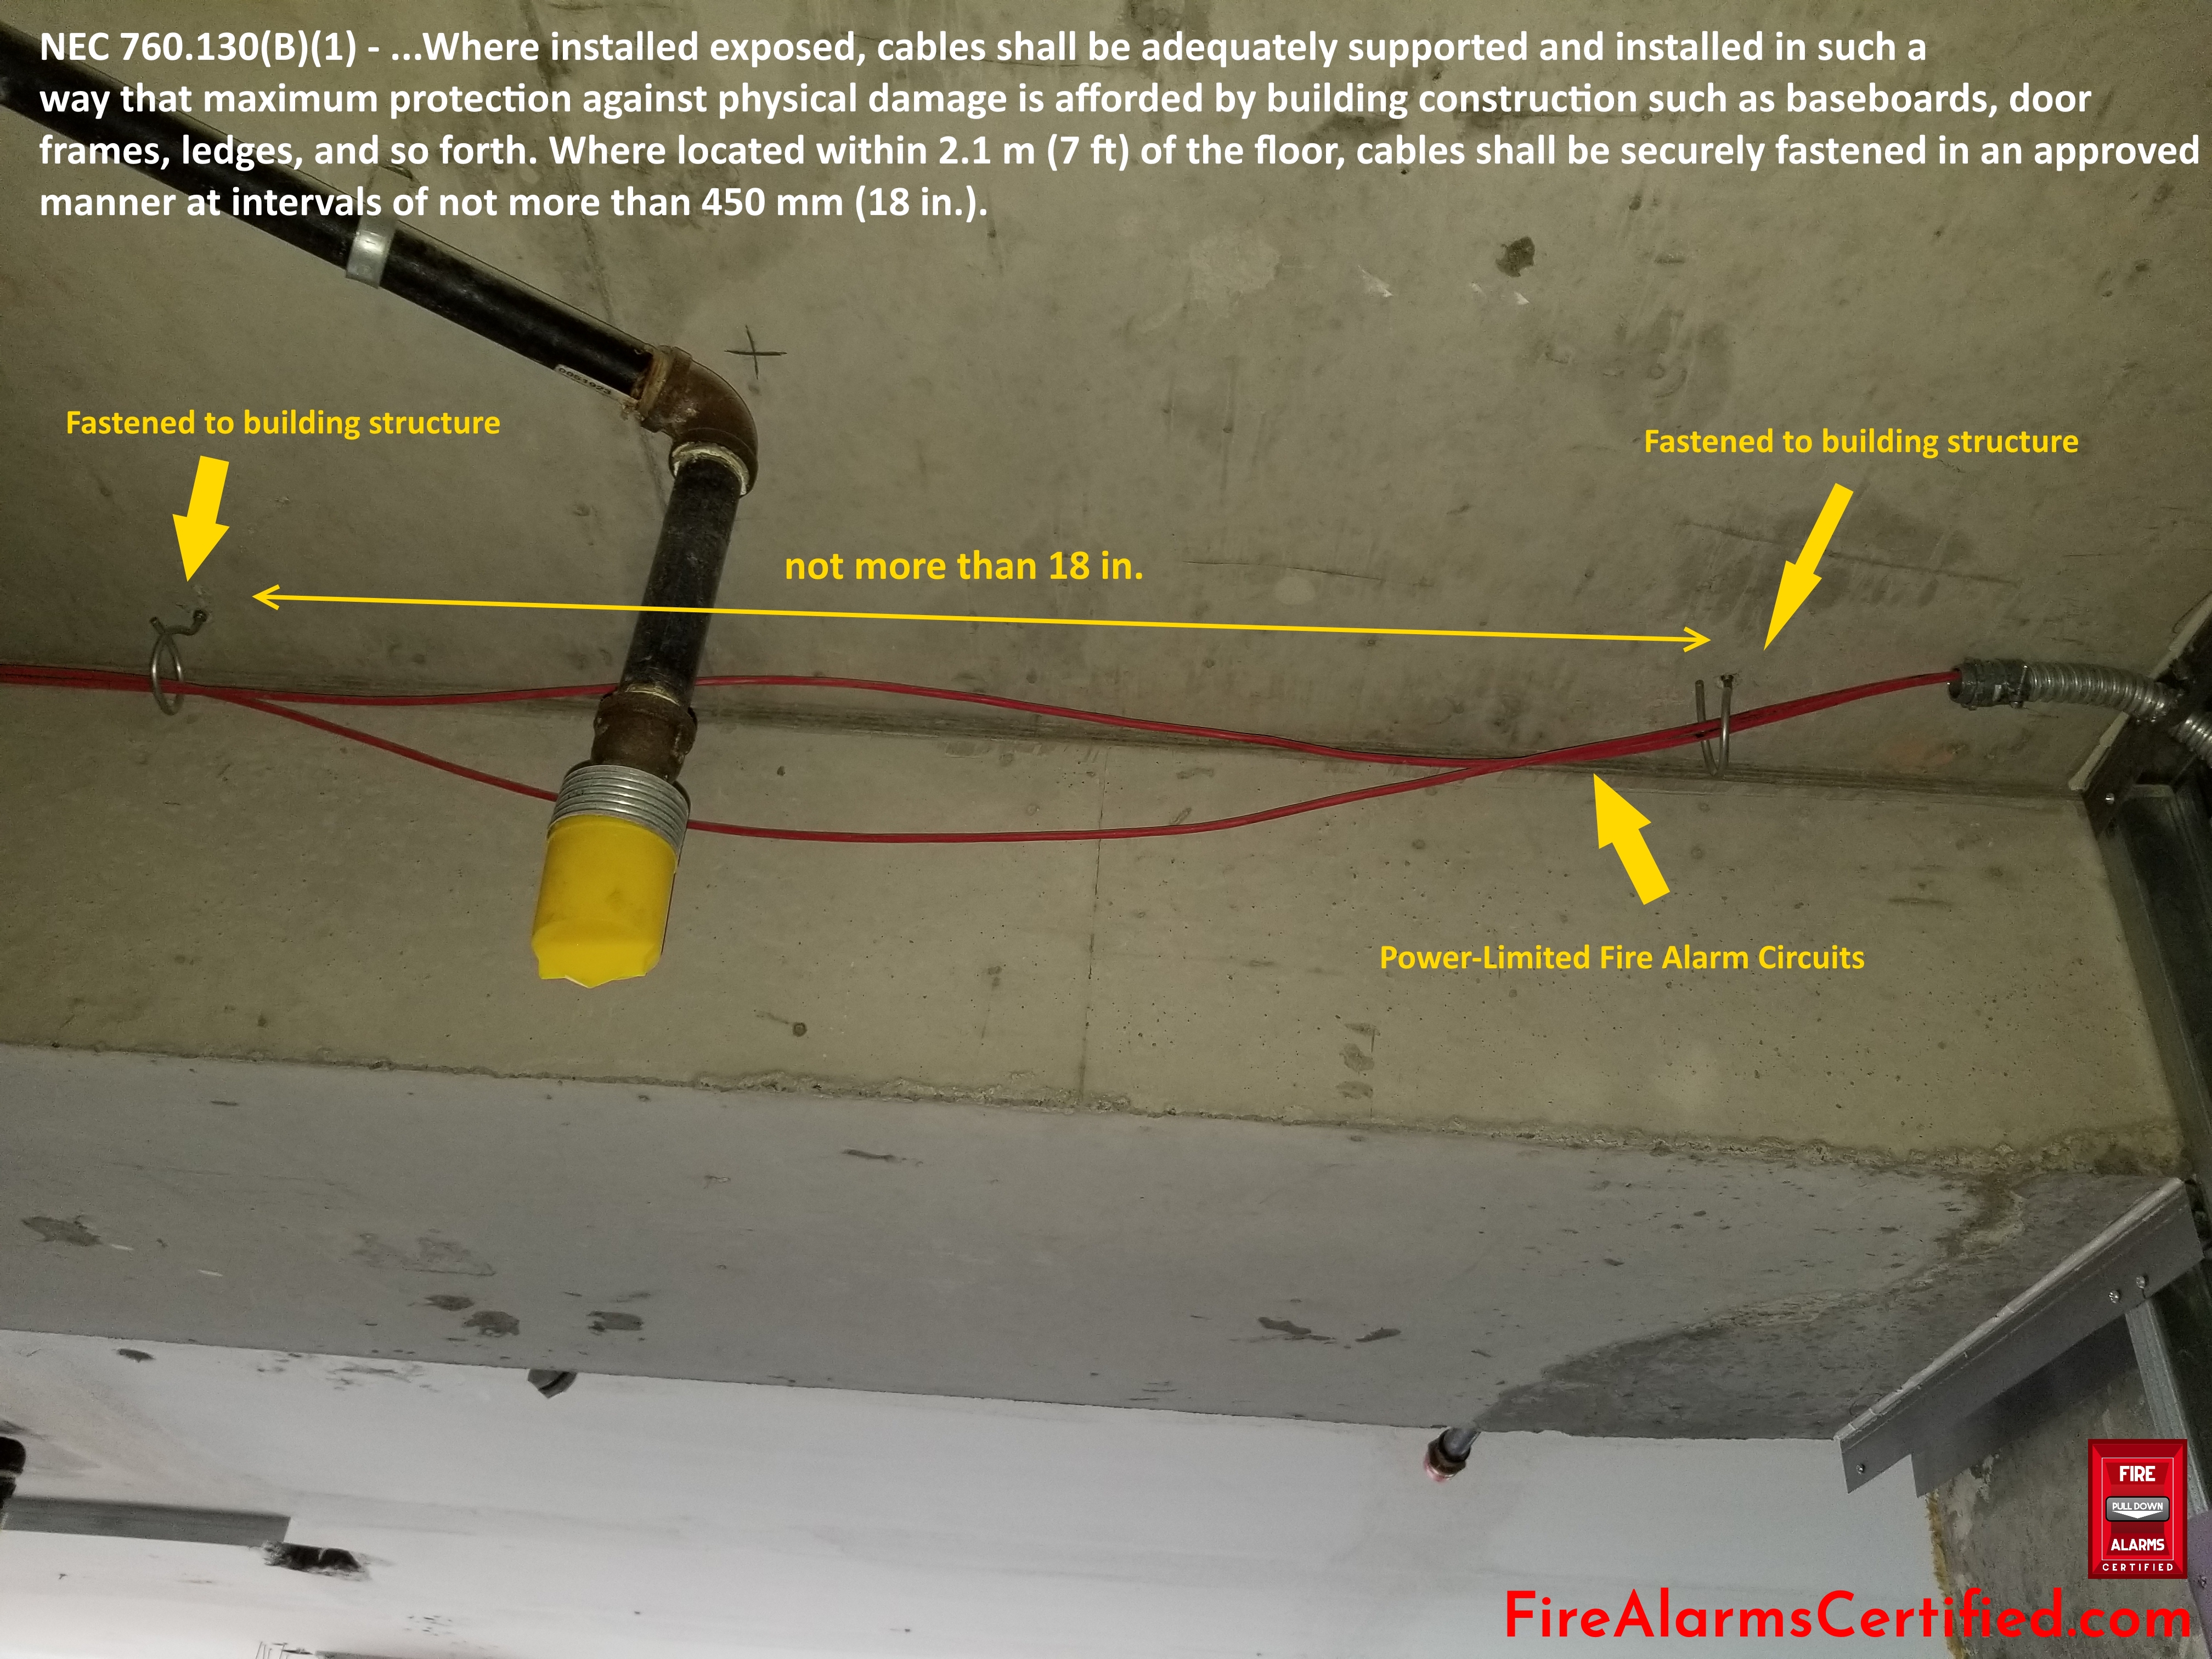 Support for Power-Limited Fire Alarm (PLFA) Circuit Cables - Fire